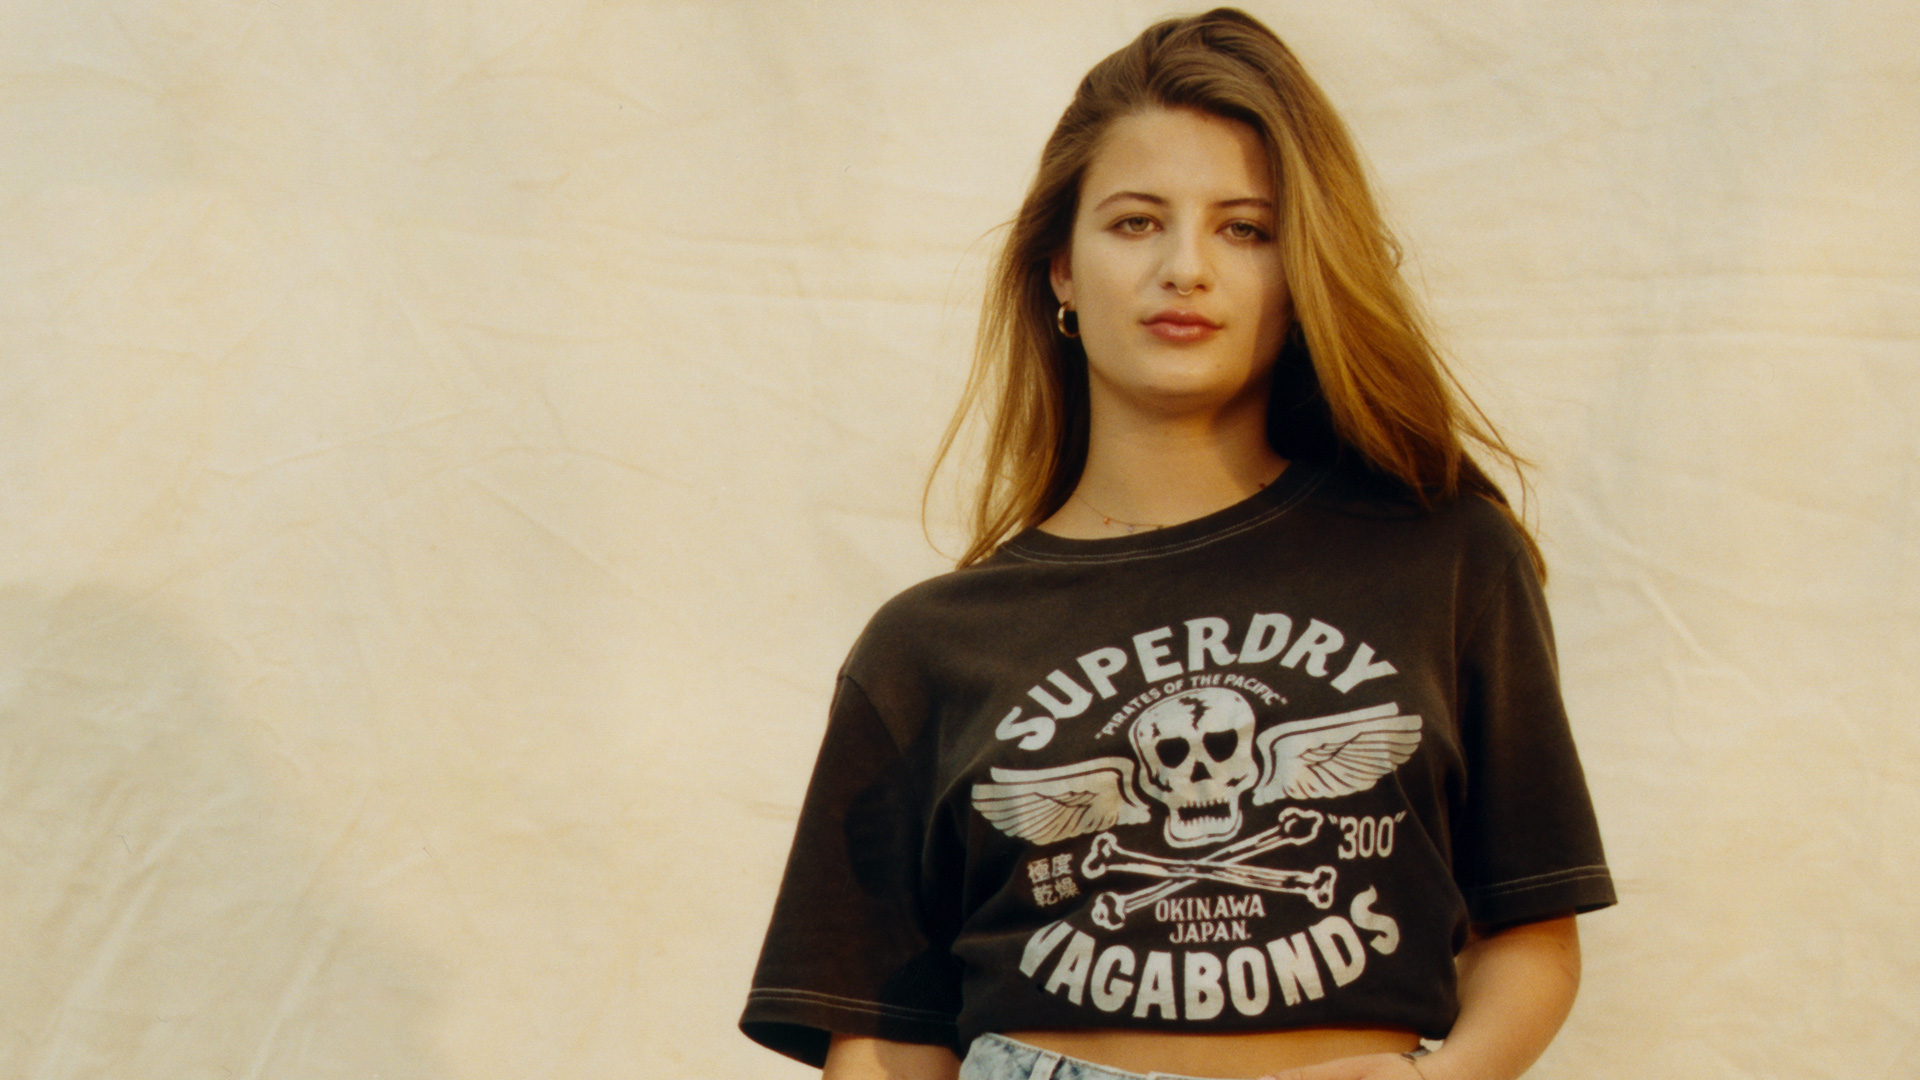 Young woman wearing a black Superdry Vagabonds t-shirt